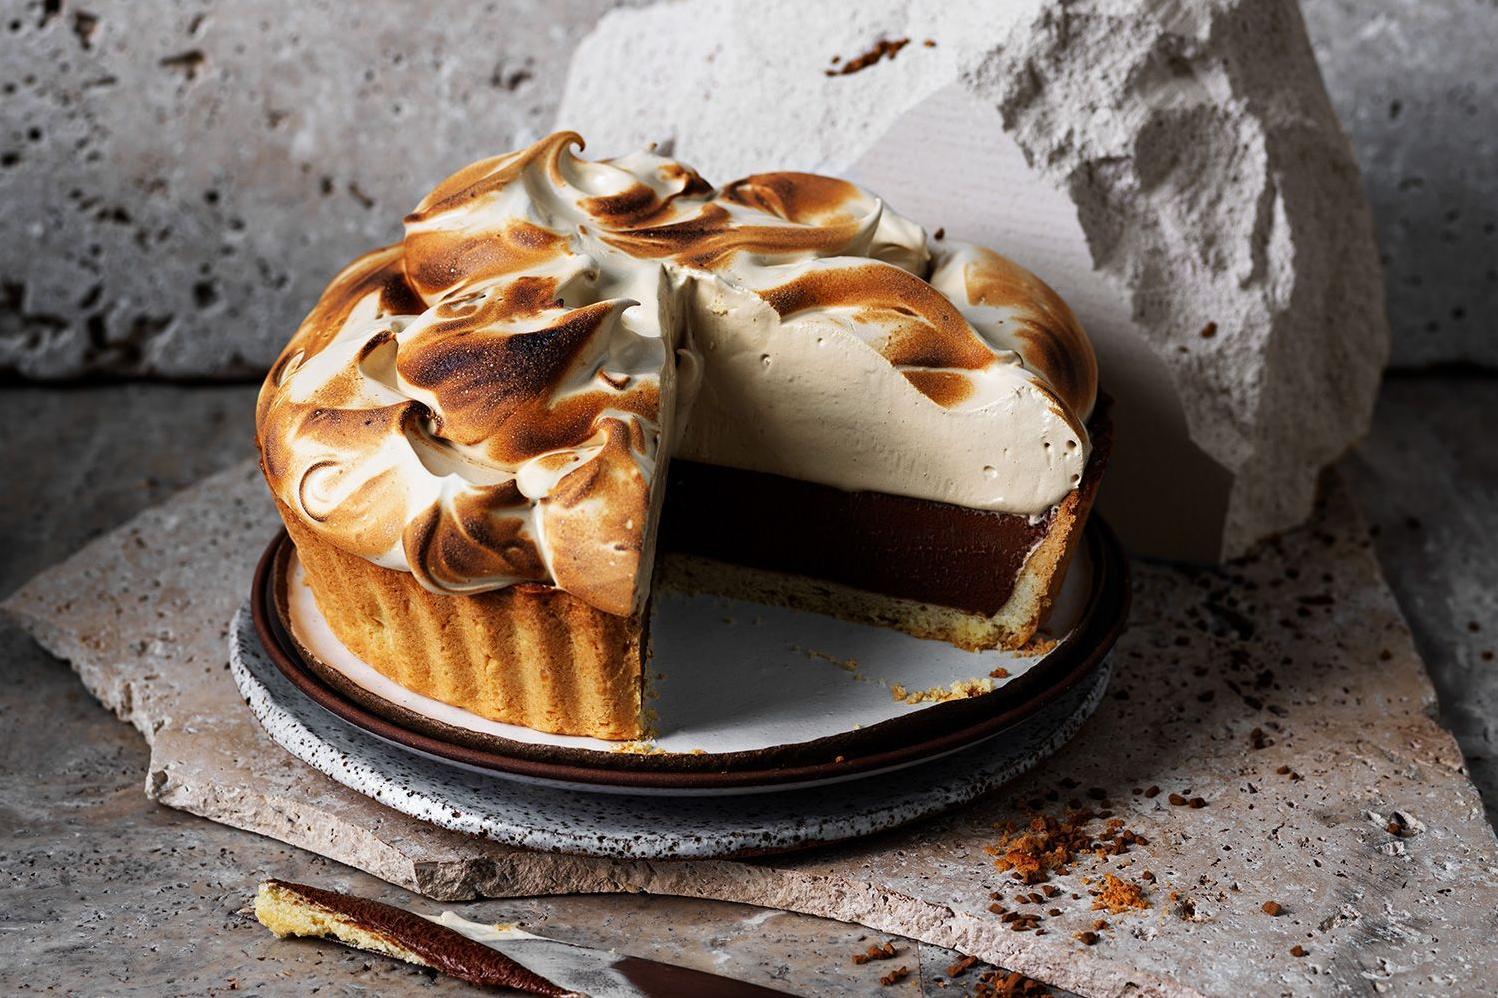  The fluffy and airy meringue topping balances perfectly the rich aromas of coffee and the sweet notes of the crust.